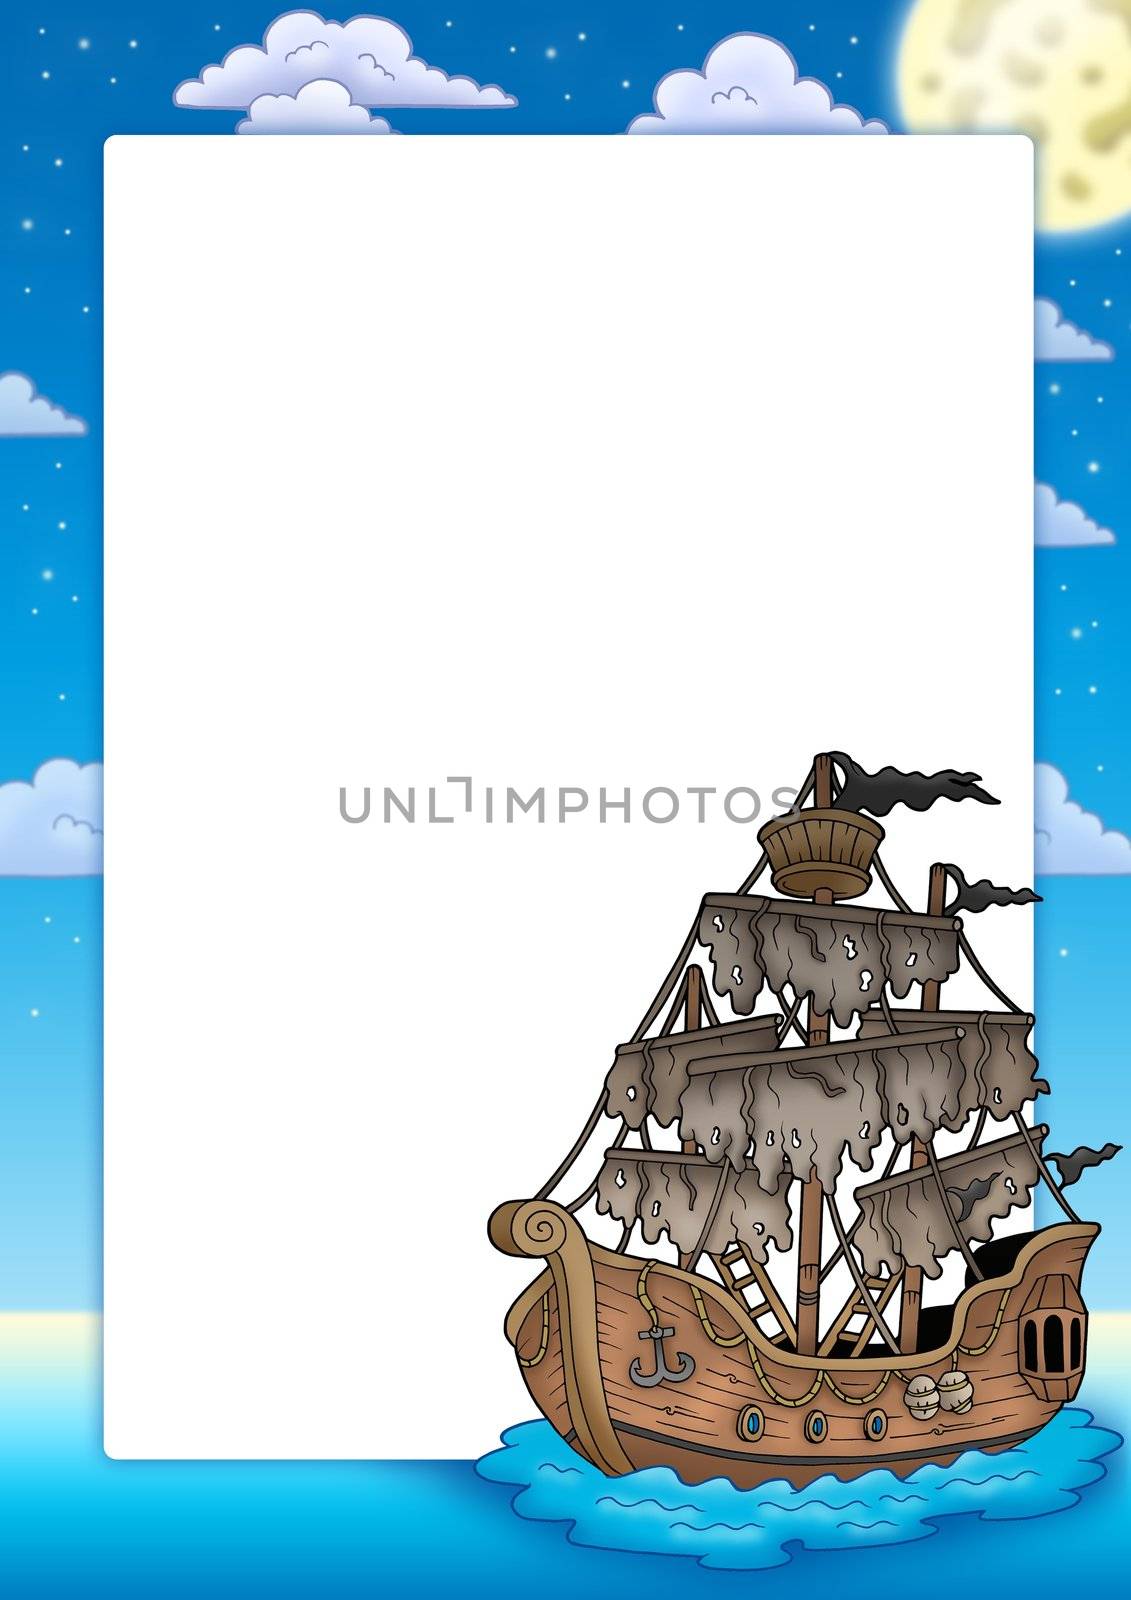 Frame with mysterious ship - color illustration.